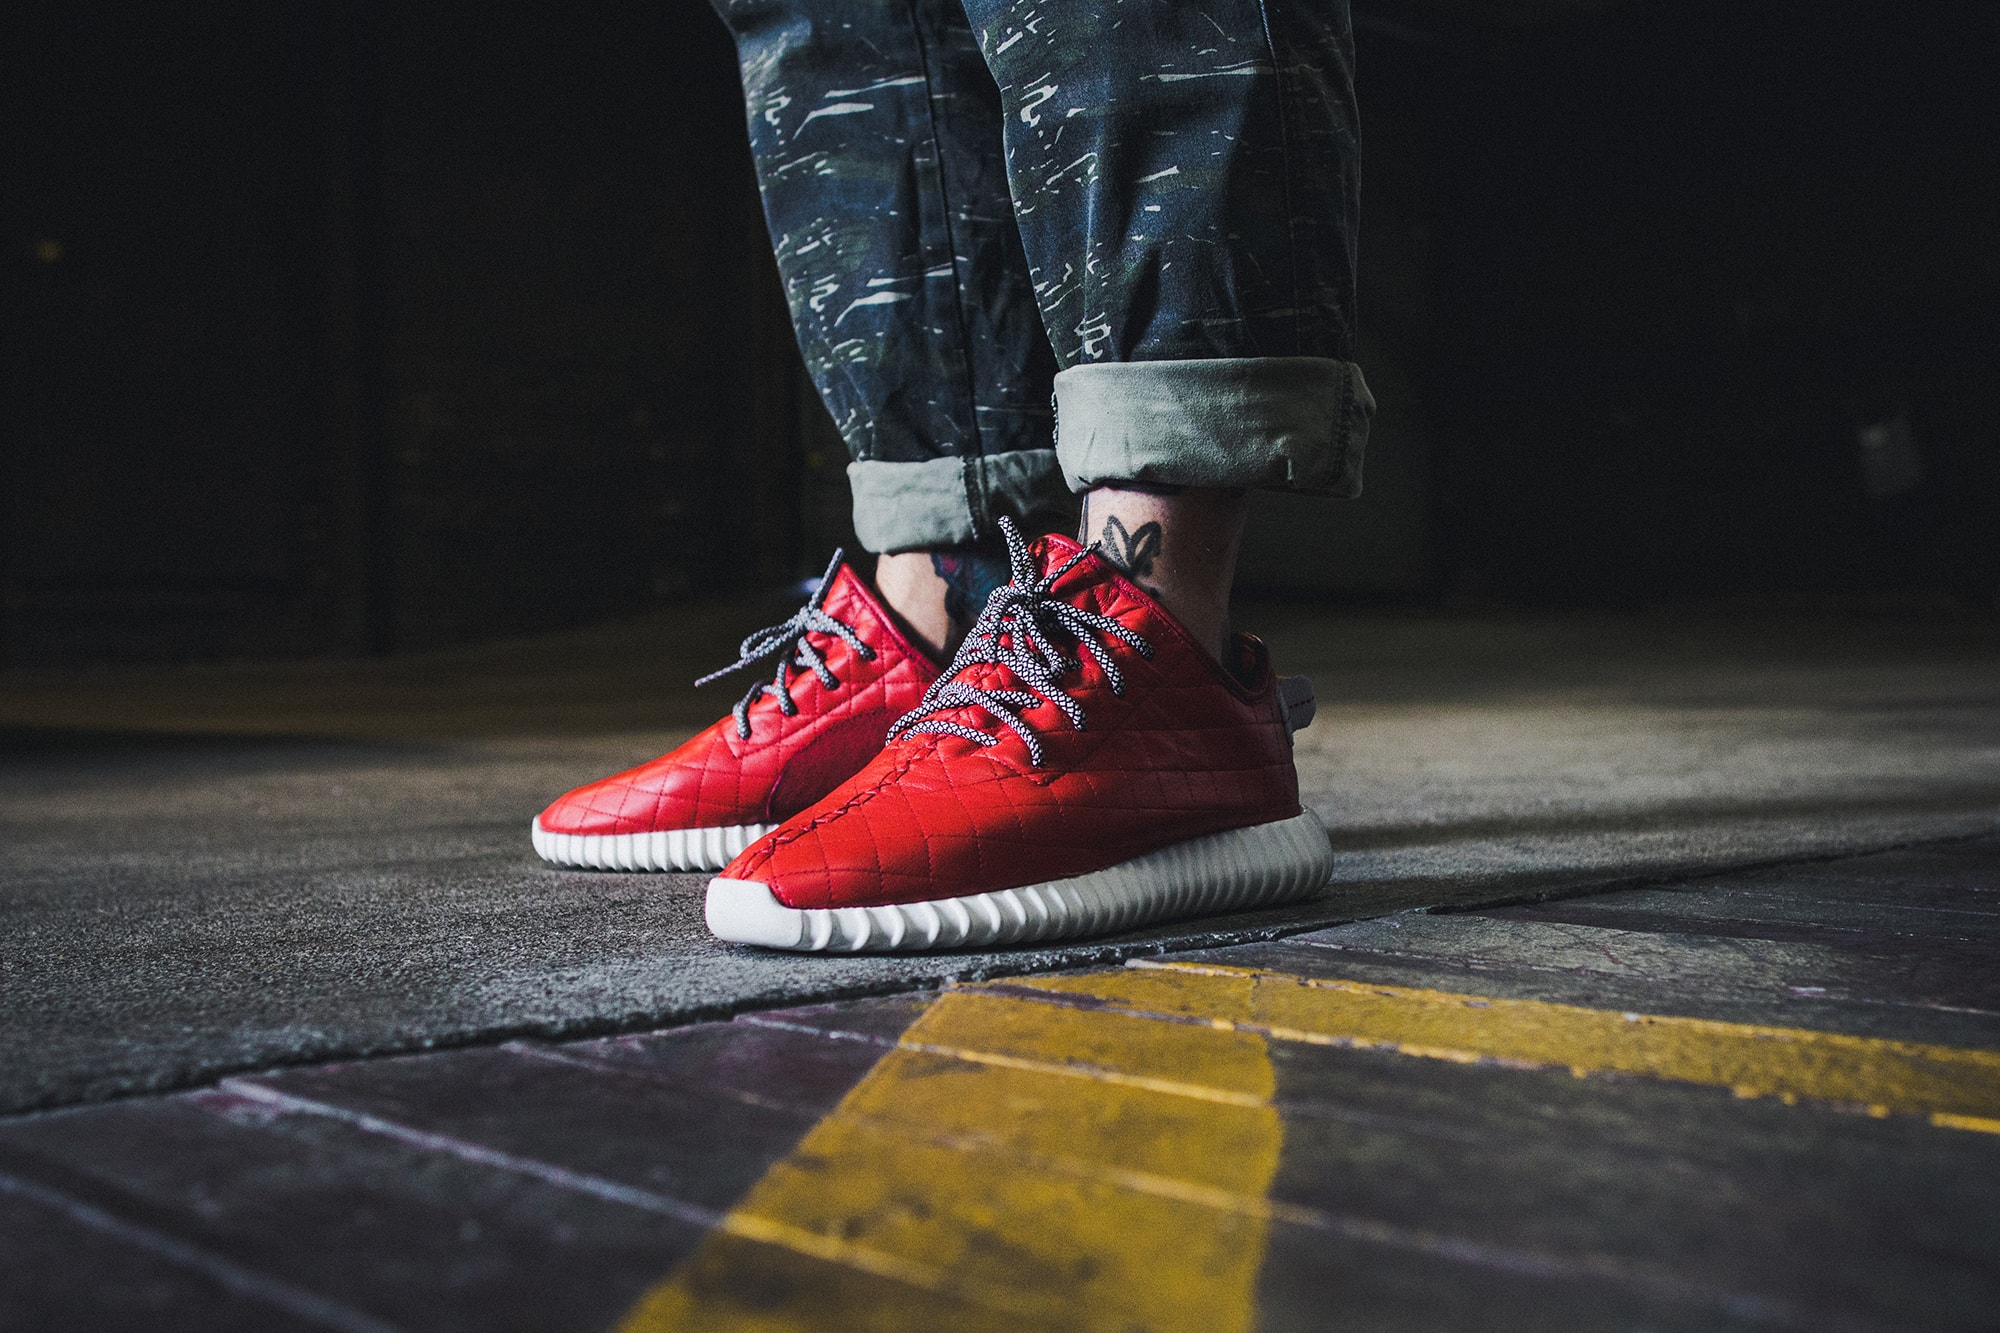 The Shoe Surgeon Custom Red Quilted Yeezy Boost 350 Sneakers